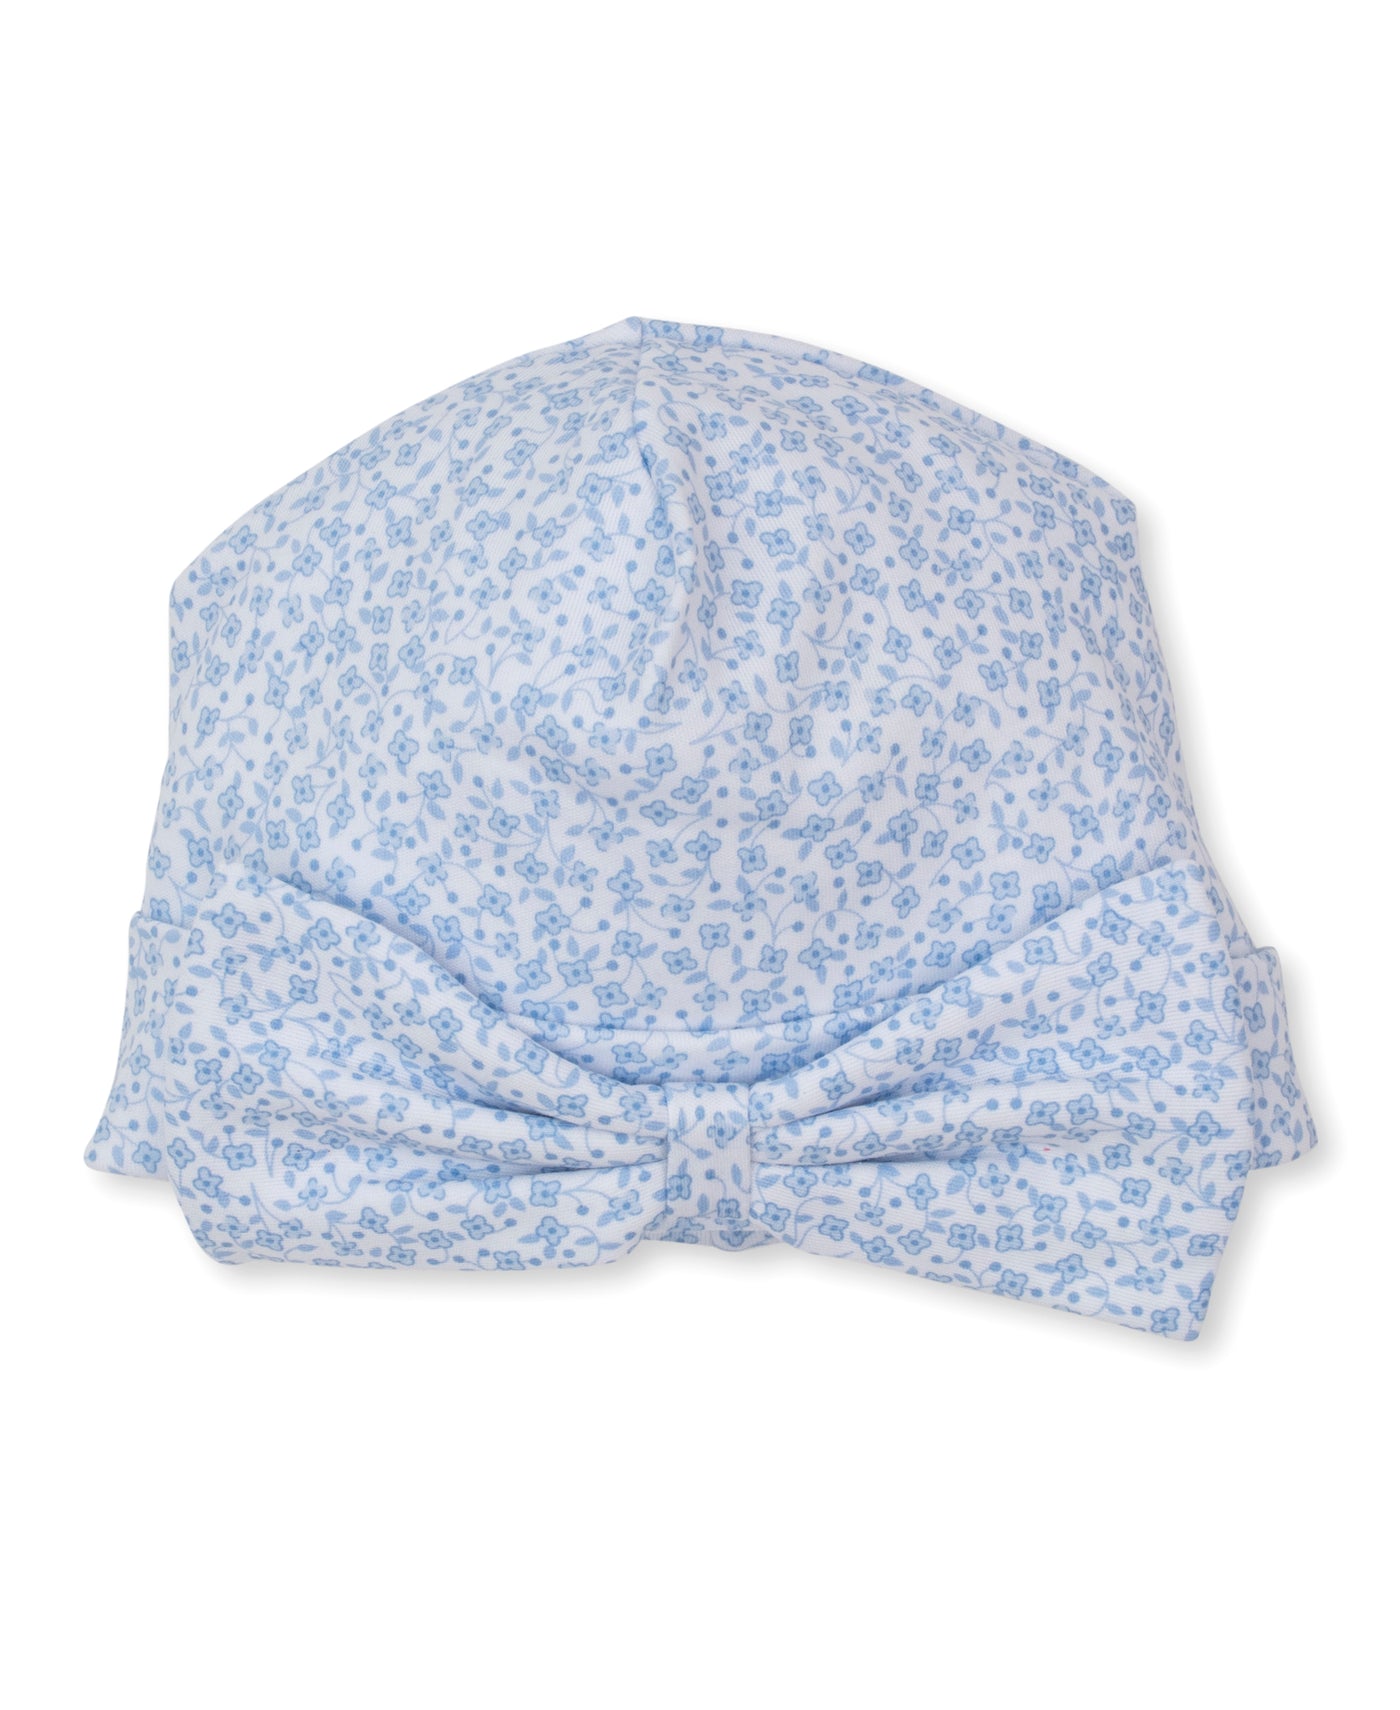 Petite Bloom Hat with Bow - Blue